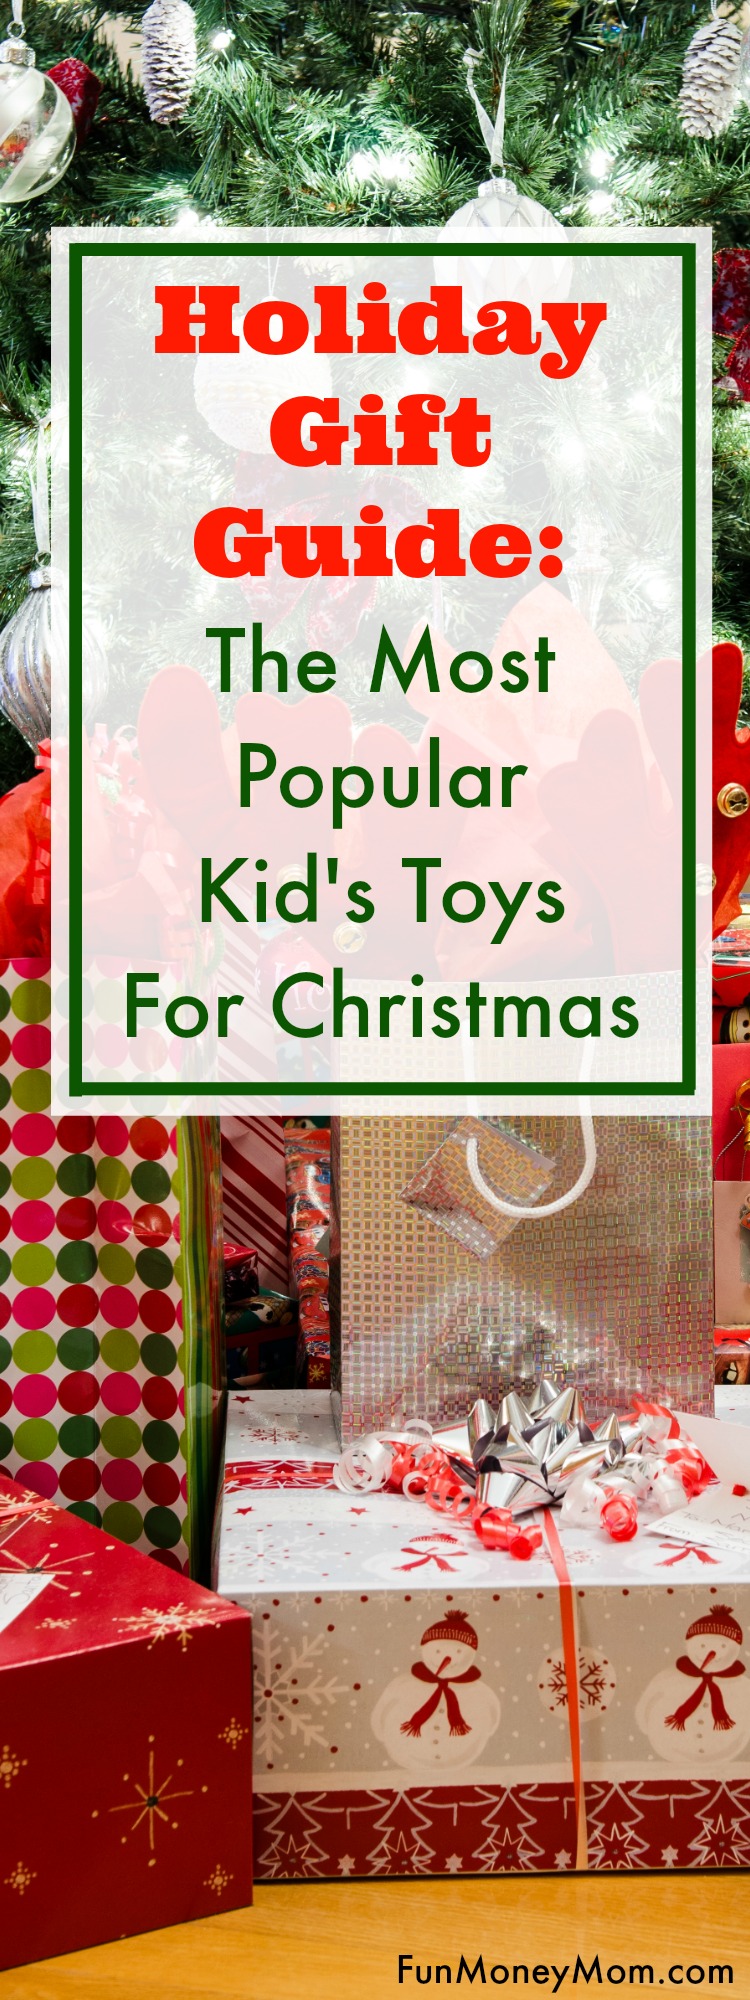 Holiday Gift Guide Most Popular Kid's Toys For Christmas